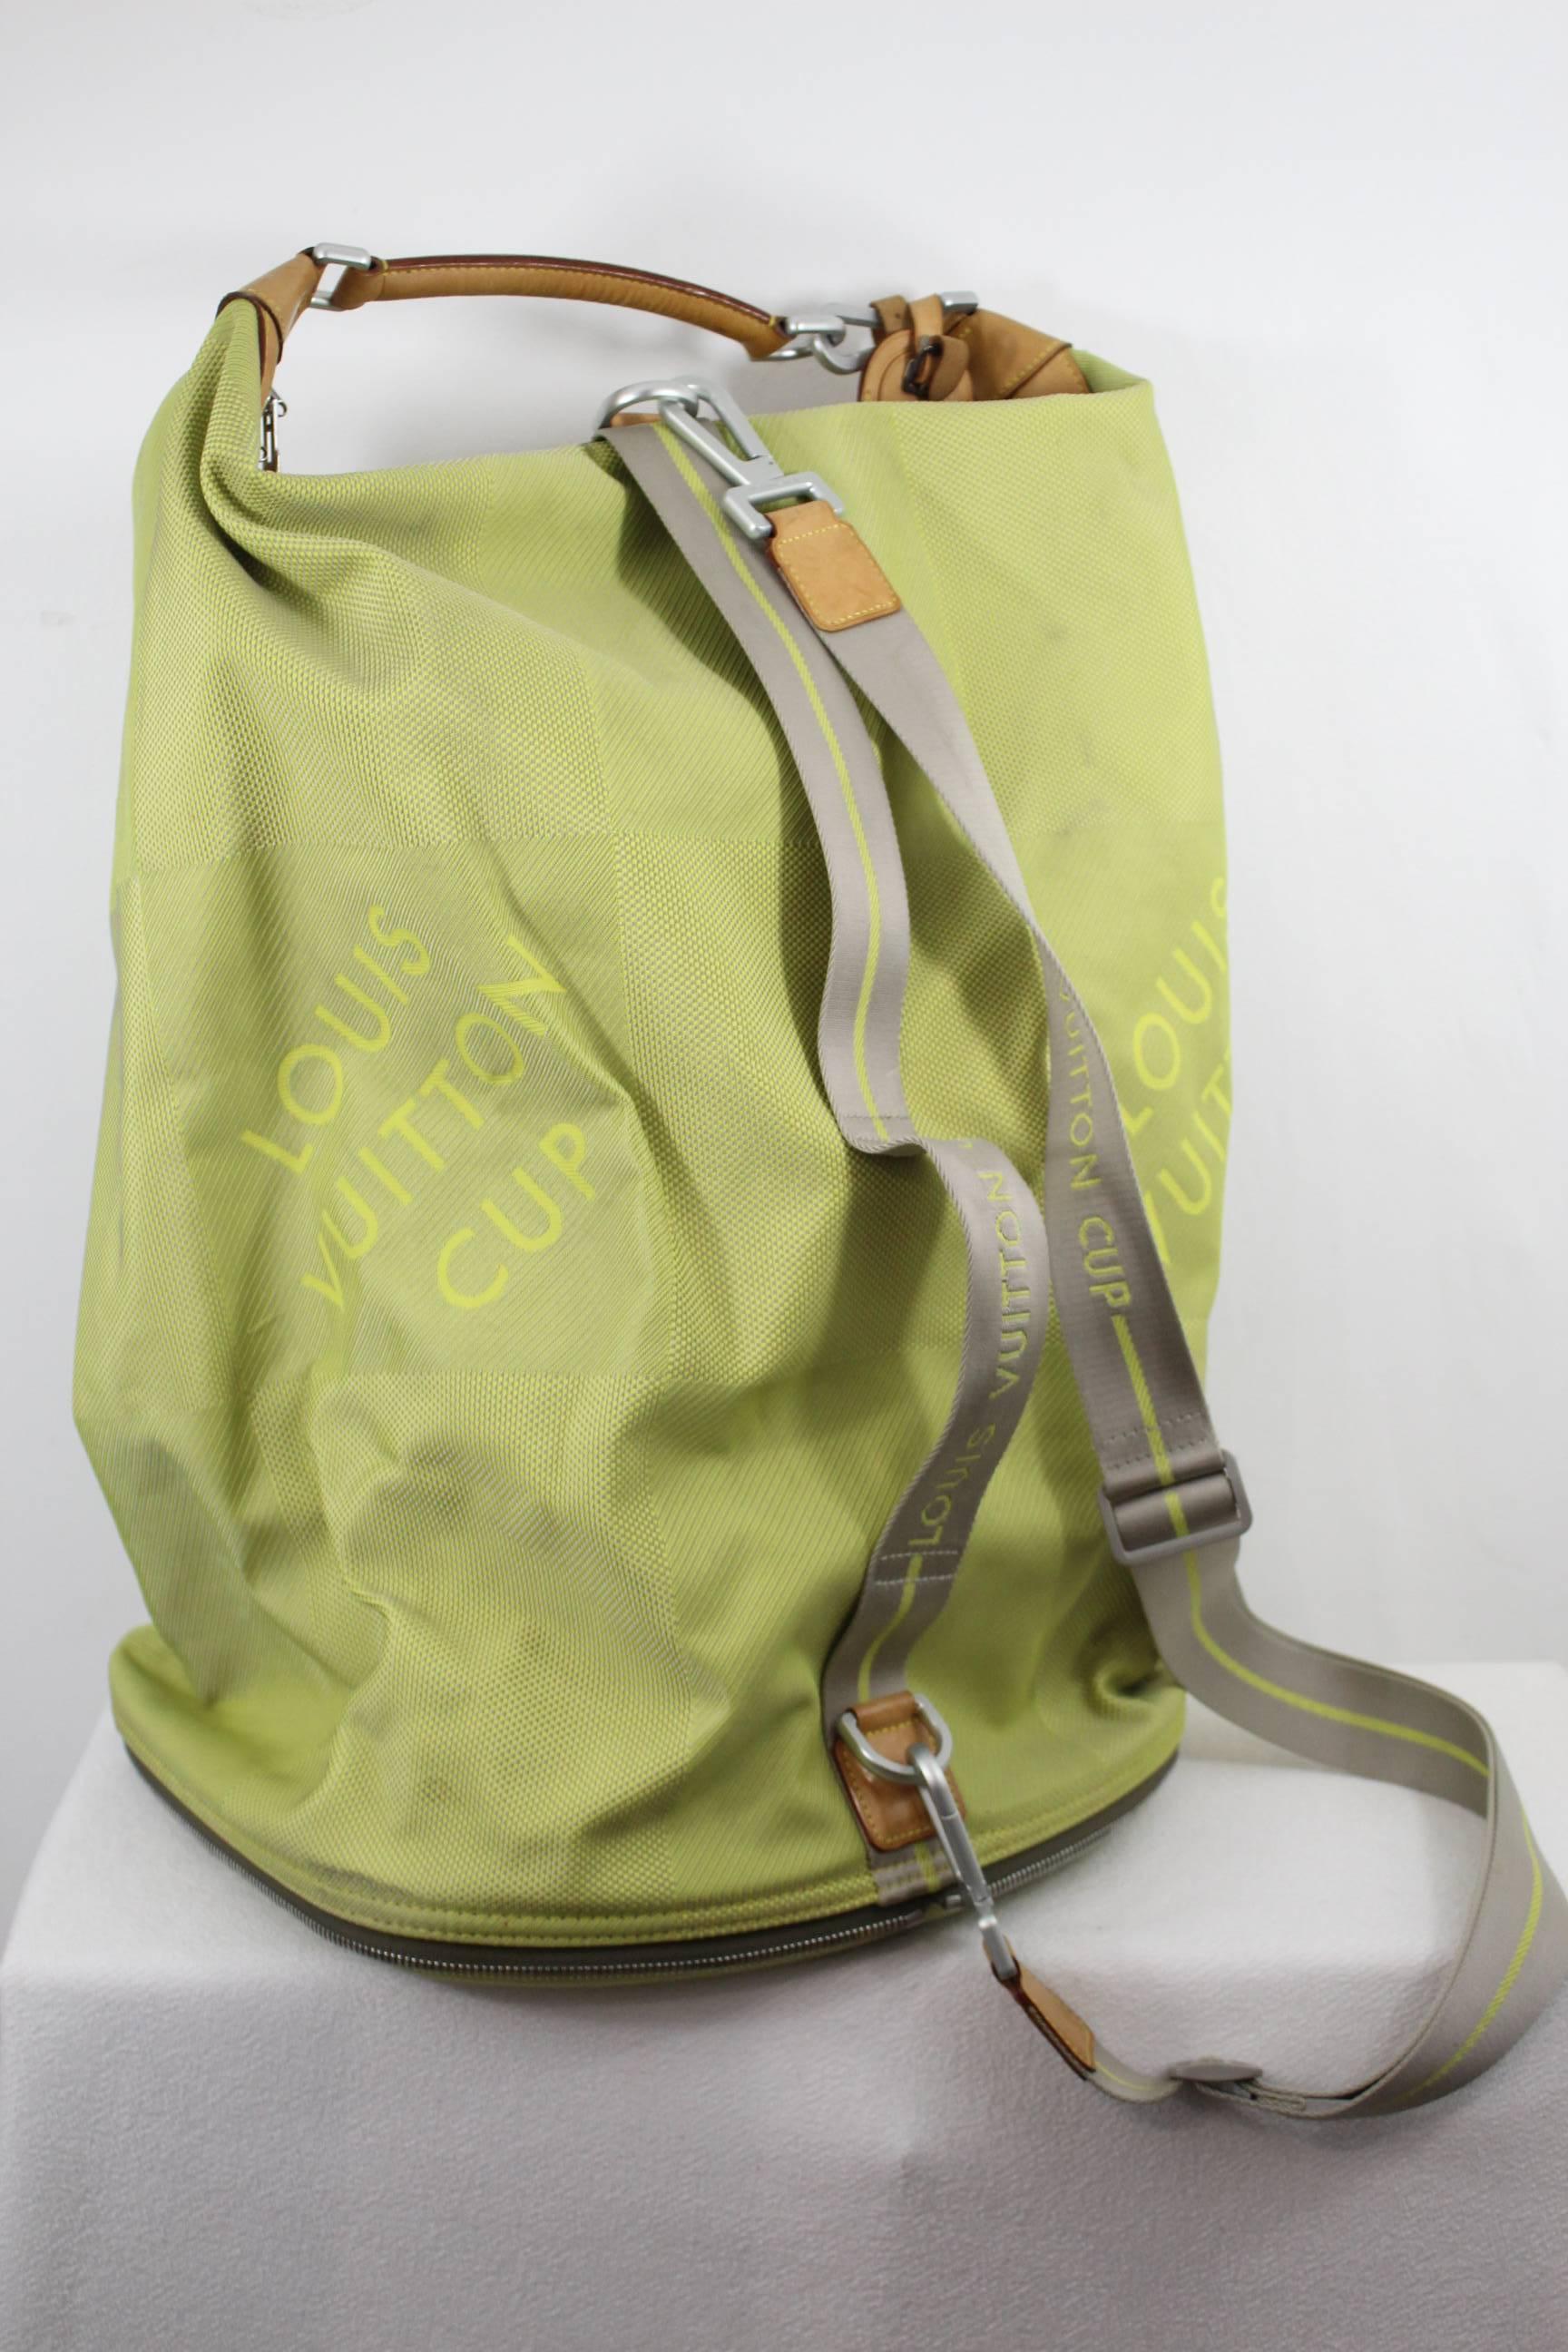 Awesome and super useful Louis Vuitton Travel bag in lime color. 

This bag has a detachable compartiment for the shoes with the wheels, that can de detached and we can use the upper part as a shoulder travel bags.

Sold with adjustable